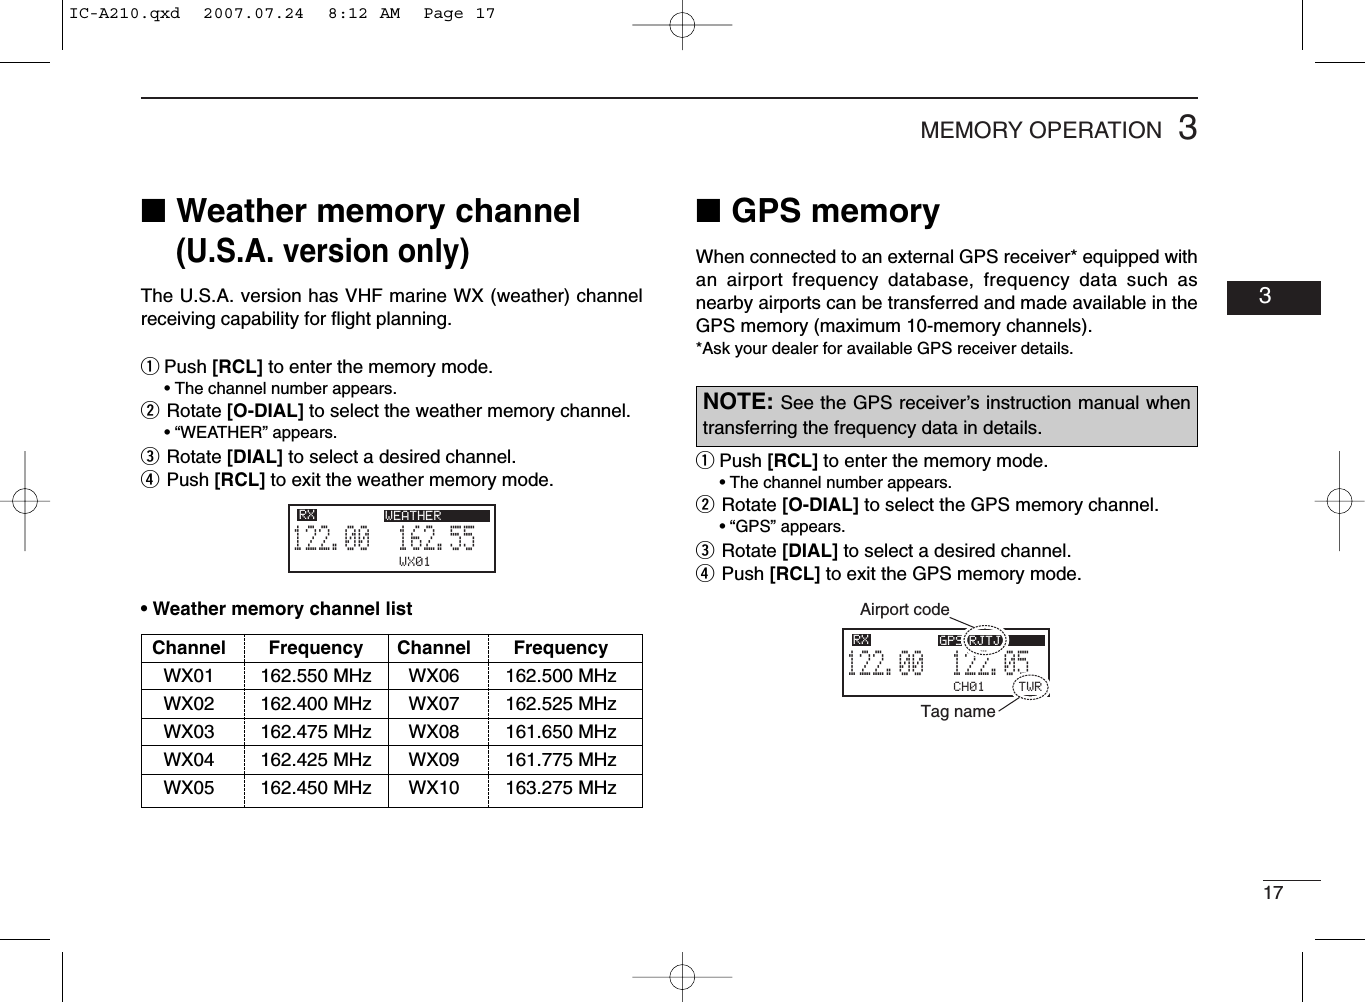 173MEMORY OPERATION03■GPS memoryWhen connected to an external GPS receiver* equipped withan airport frequency database, frequency data such asnearby airports can be transferred and made available in theGPS memory (maximum 10-memory channels).*Ask your dealer for available GPS receiver details.qPush [RCL] to enter the memory mode.• The channel number appears.wRotate [O-DIAL] to select the GPS memory channel.• “GPS” appears.eRotate [DIAL] to select a desired channel.rPush [RCL] to exit the GPS memory mode.■Weather memory channel (U.S.A. version only)The U.S.A. version has VHF marine WX (weather) channelreceiving capability for ﬂight planning.qPush [RCL] to enter the memory mode.• The channel number appears.wRotate [O-DIAL] to select the weather memory channel.• “WEATHER” appears.eRotate [DIAL] to select a desired channel.rPush [RCL] to exit the weather memory mode.WX01162.555122.00RX DUAL WEATHERCH01 TWR122.055122.00RX GPS RJTJAirport codeTag nameChannel Frequency Channel FrequencyWX01 162.550 MHz WX06 162.500 MHzWX02 162.400 MHz WX07 162.525 MHzWX03 162.475 MHz WX08 161.650 MHzWX04 162.425 MHz WX09 161.775 MHzWX05 162.450 MHz WX10 163.275 MHz• Weather memory channel listNOTE: See the GPS receiver’s instruction manual whentransferring the frequency data in details.IC-A210.qxd  2007.07.24  8:12 AM  Page 17